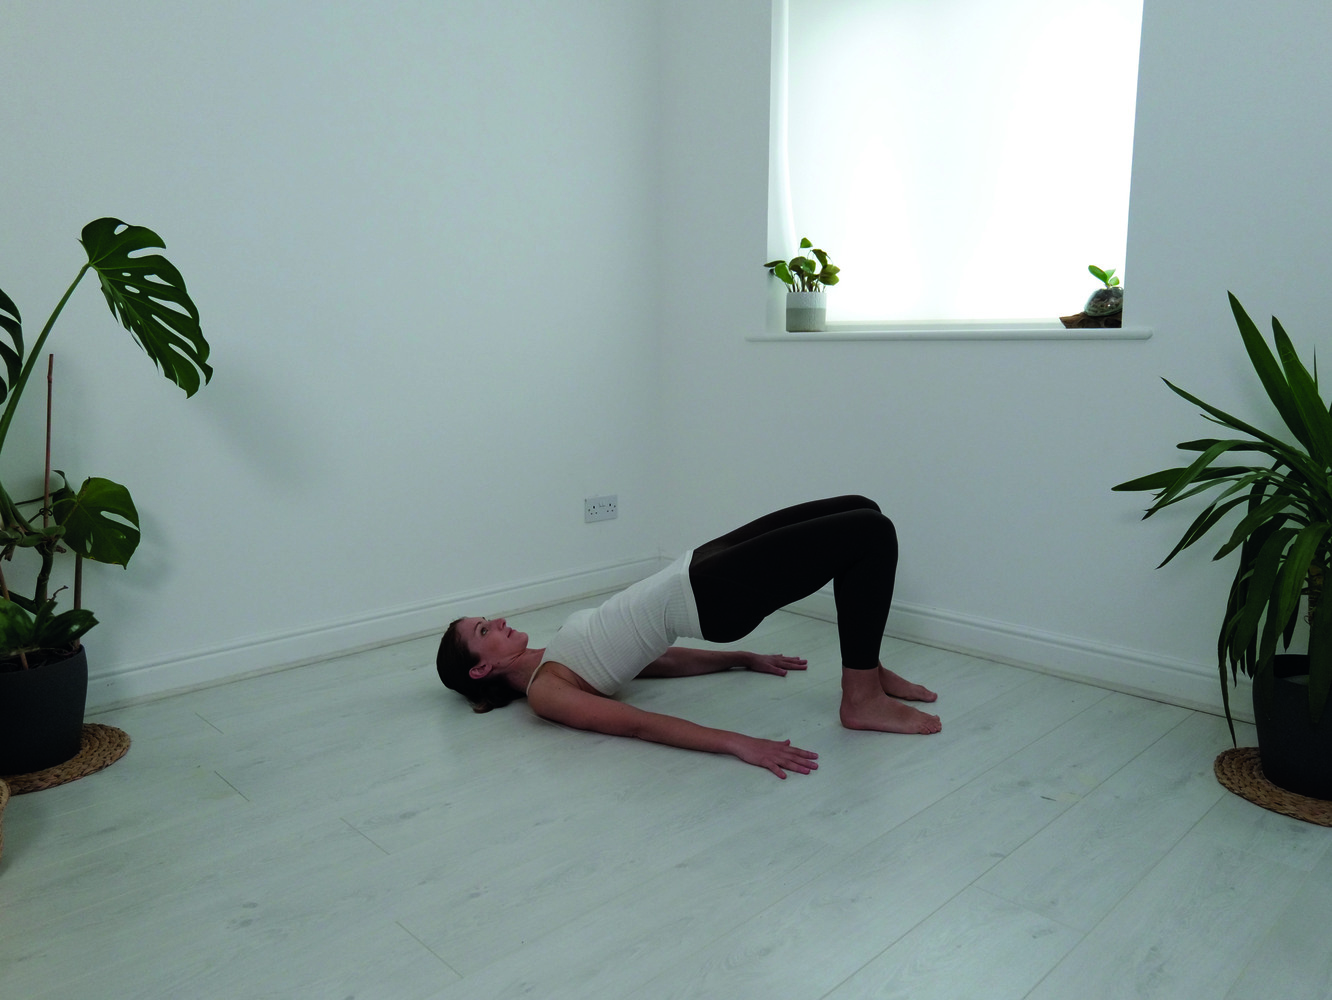 bridge roll ease stress and anxiety exercises